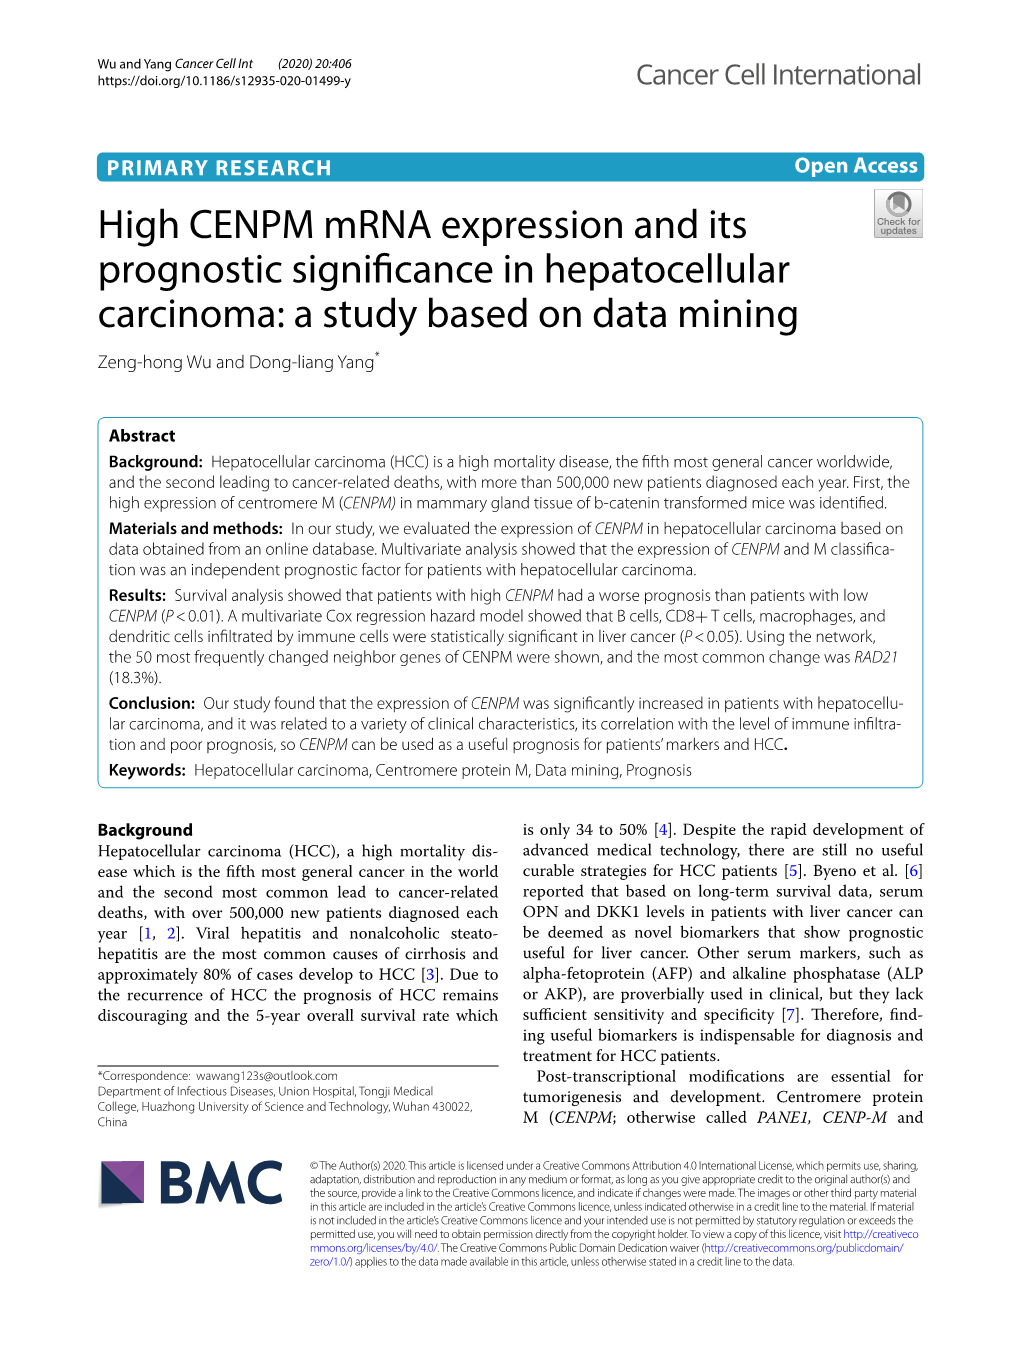 High CENPM Mrna Expression and Its Prognostic Signifcance in Hepatocellular Carcinoma: a Study Based on Data Mining Zeng‑Hong Wu and Dong‑Liang Yang*